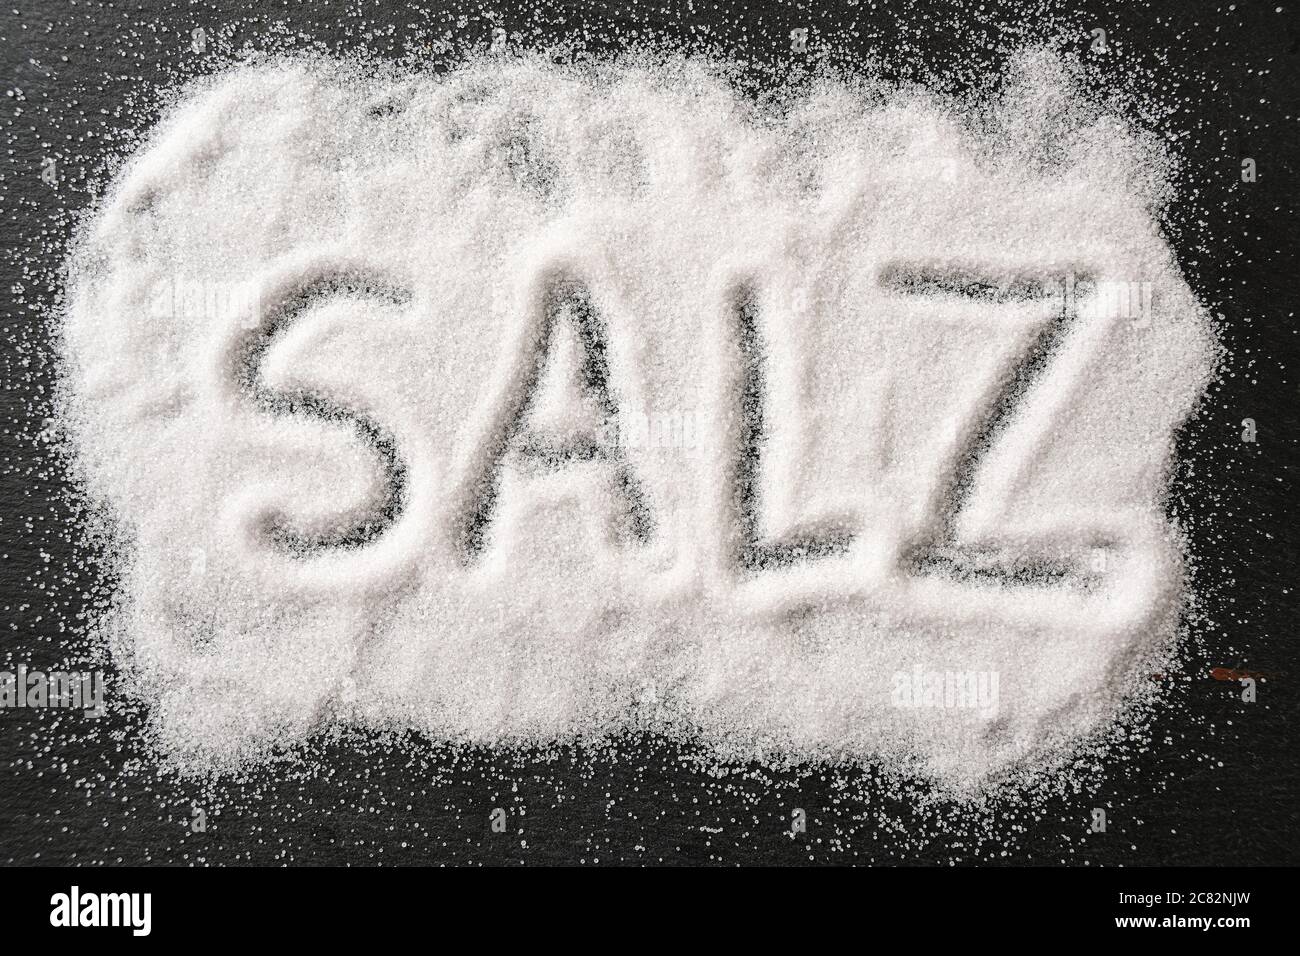 German word SALZ, meaning salt, written in spilled out salt crystals on a dark slate, high angle view from above, selected focus Stock Photo